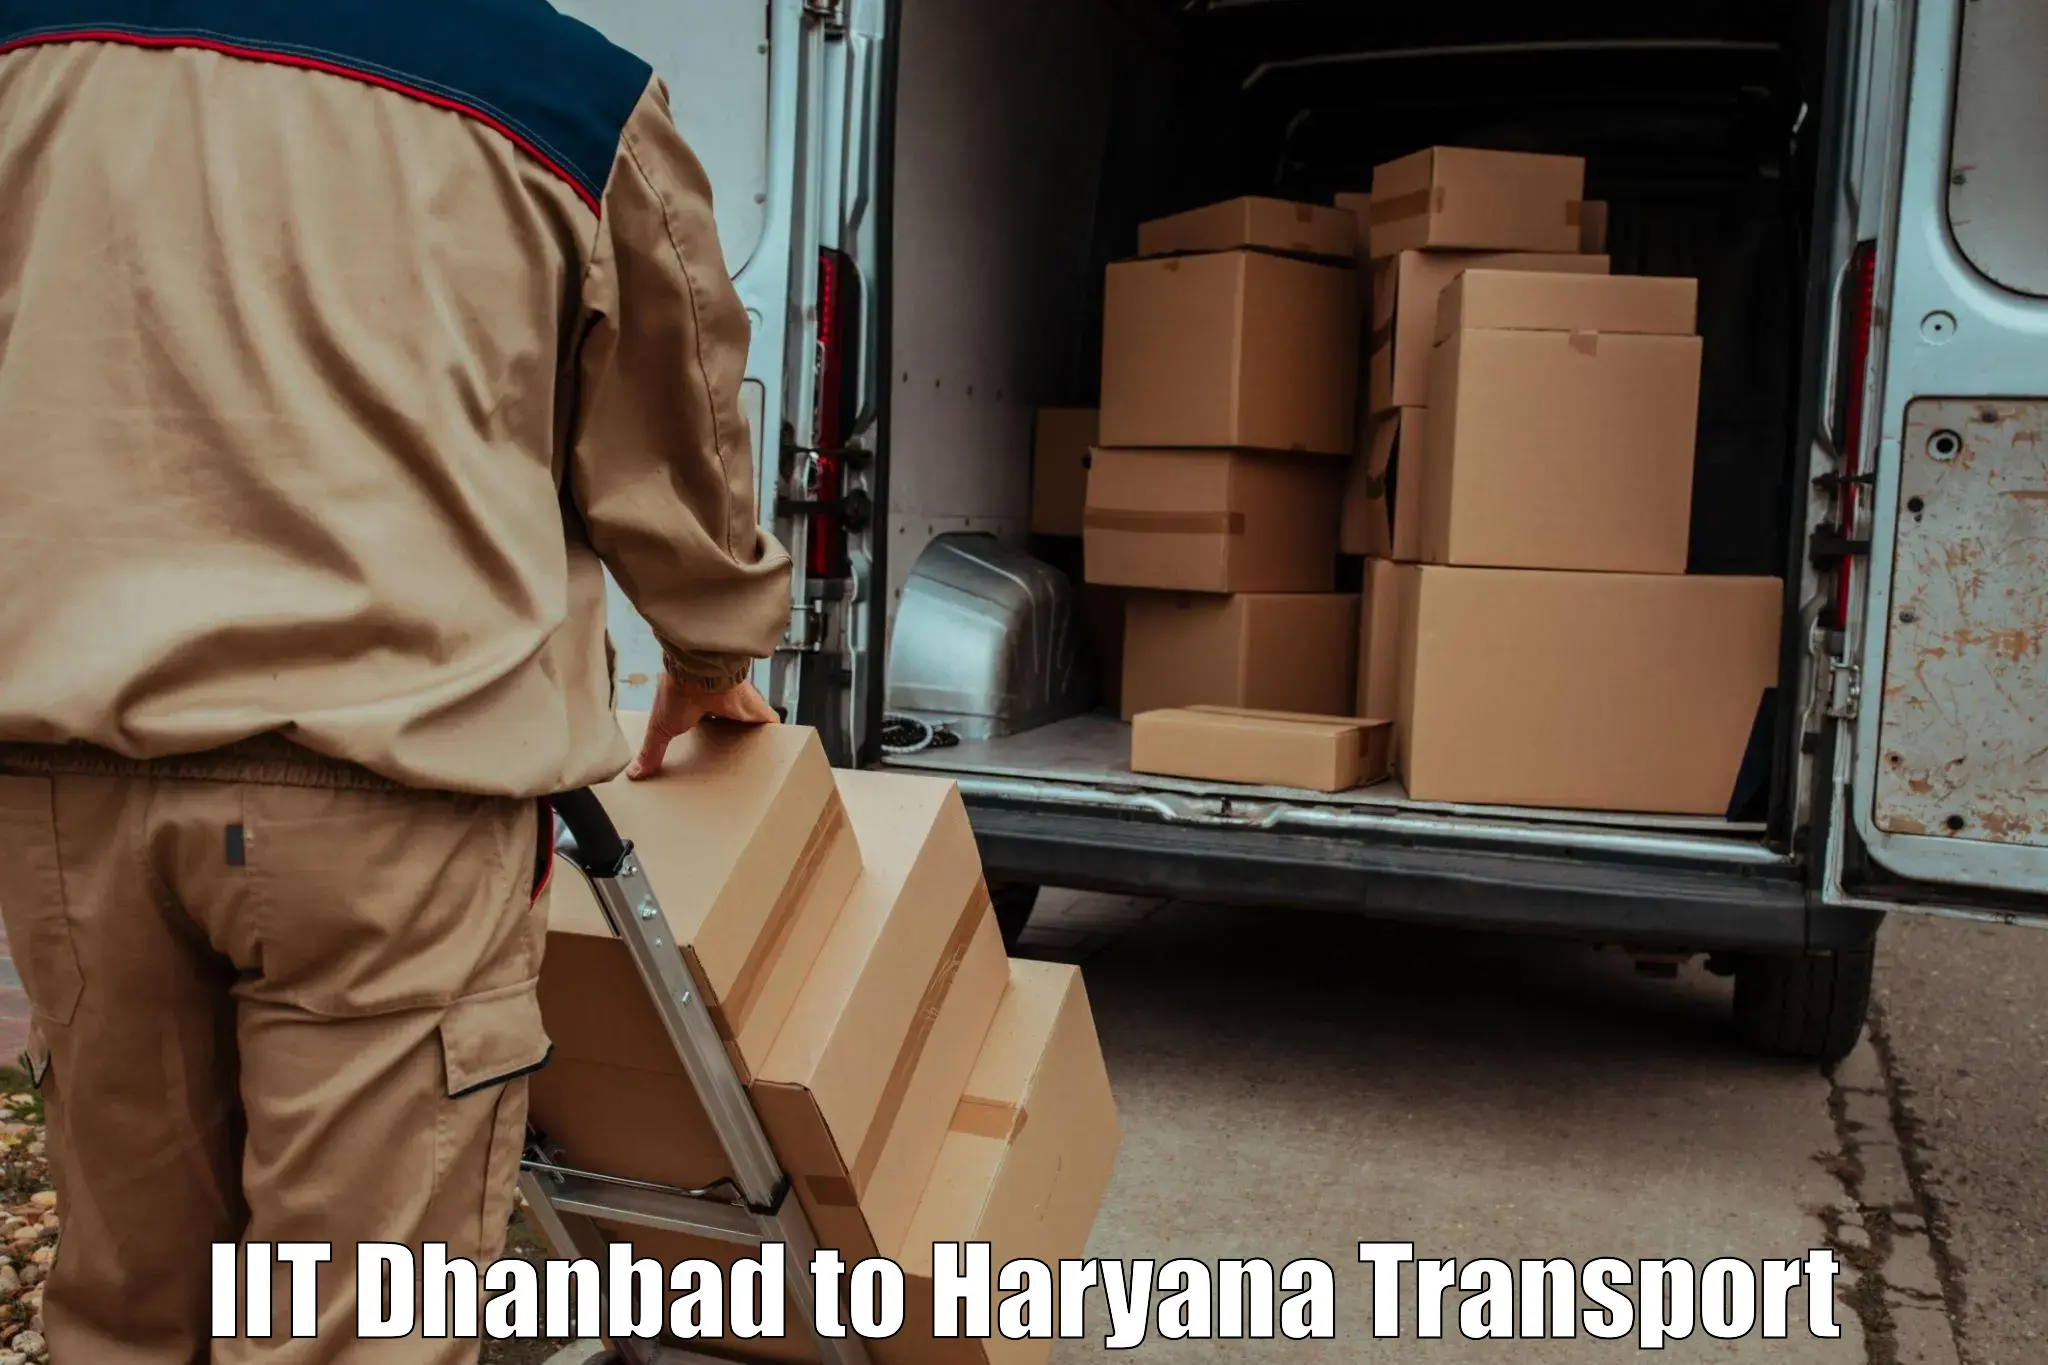 Air freight transport services IIT Dhanbad to Sonipat